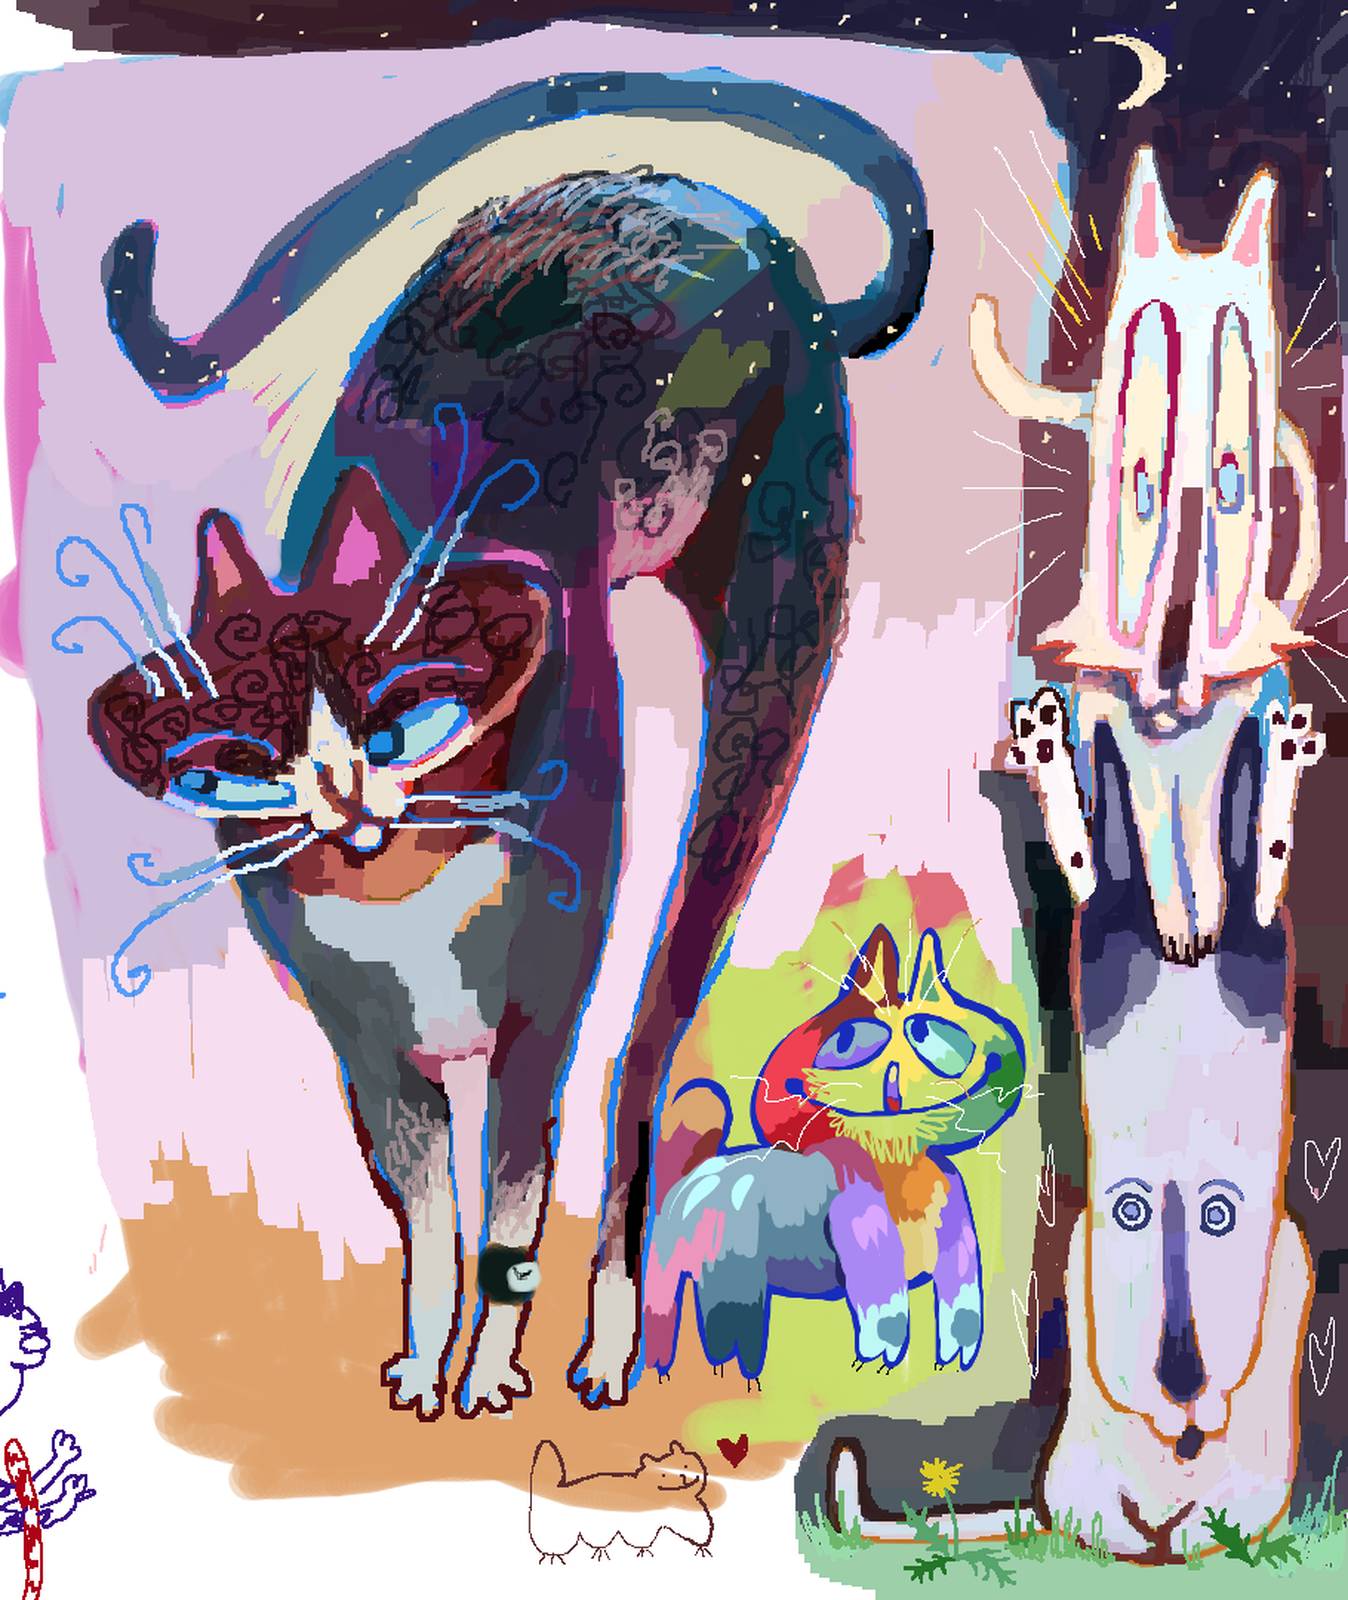 Collagestyle drawing of a cat raising its back and looking thoughtful. It's butt blends into the night sky. at its feet, a small cat, and beside this drawing, two curious, long-faced cats, one sitting on the other's head